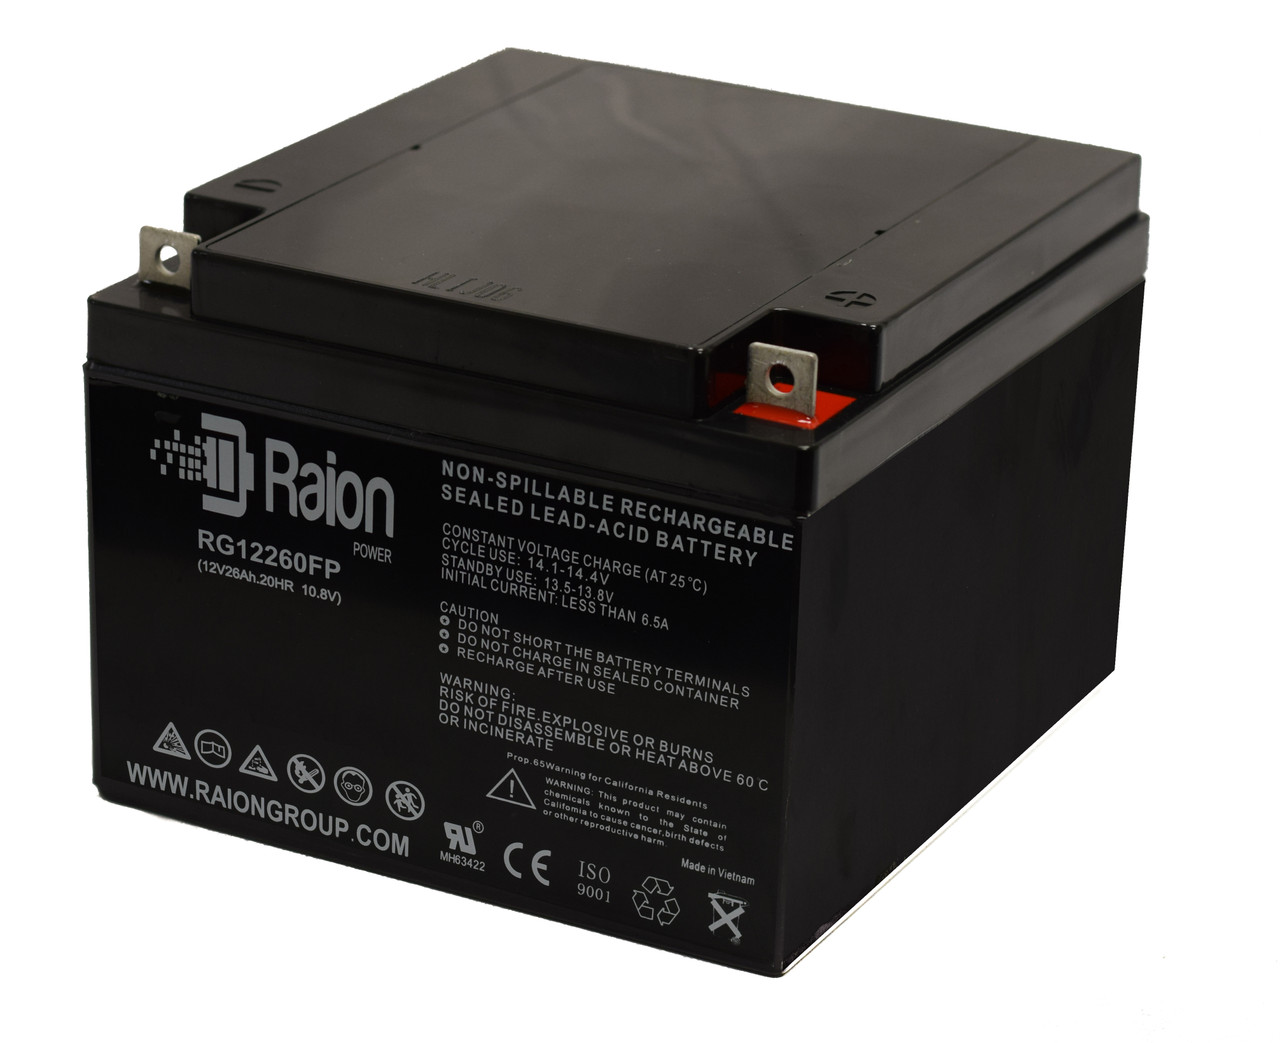 Raion Power Replacement 12V 26Ah Battery for Kontron GB1224034 - 1 Pack